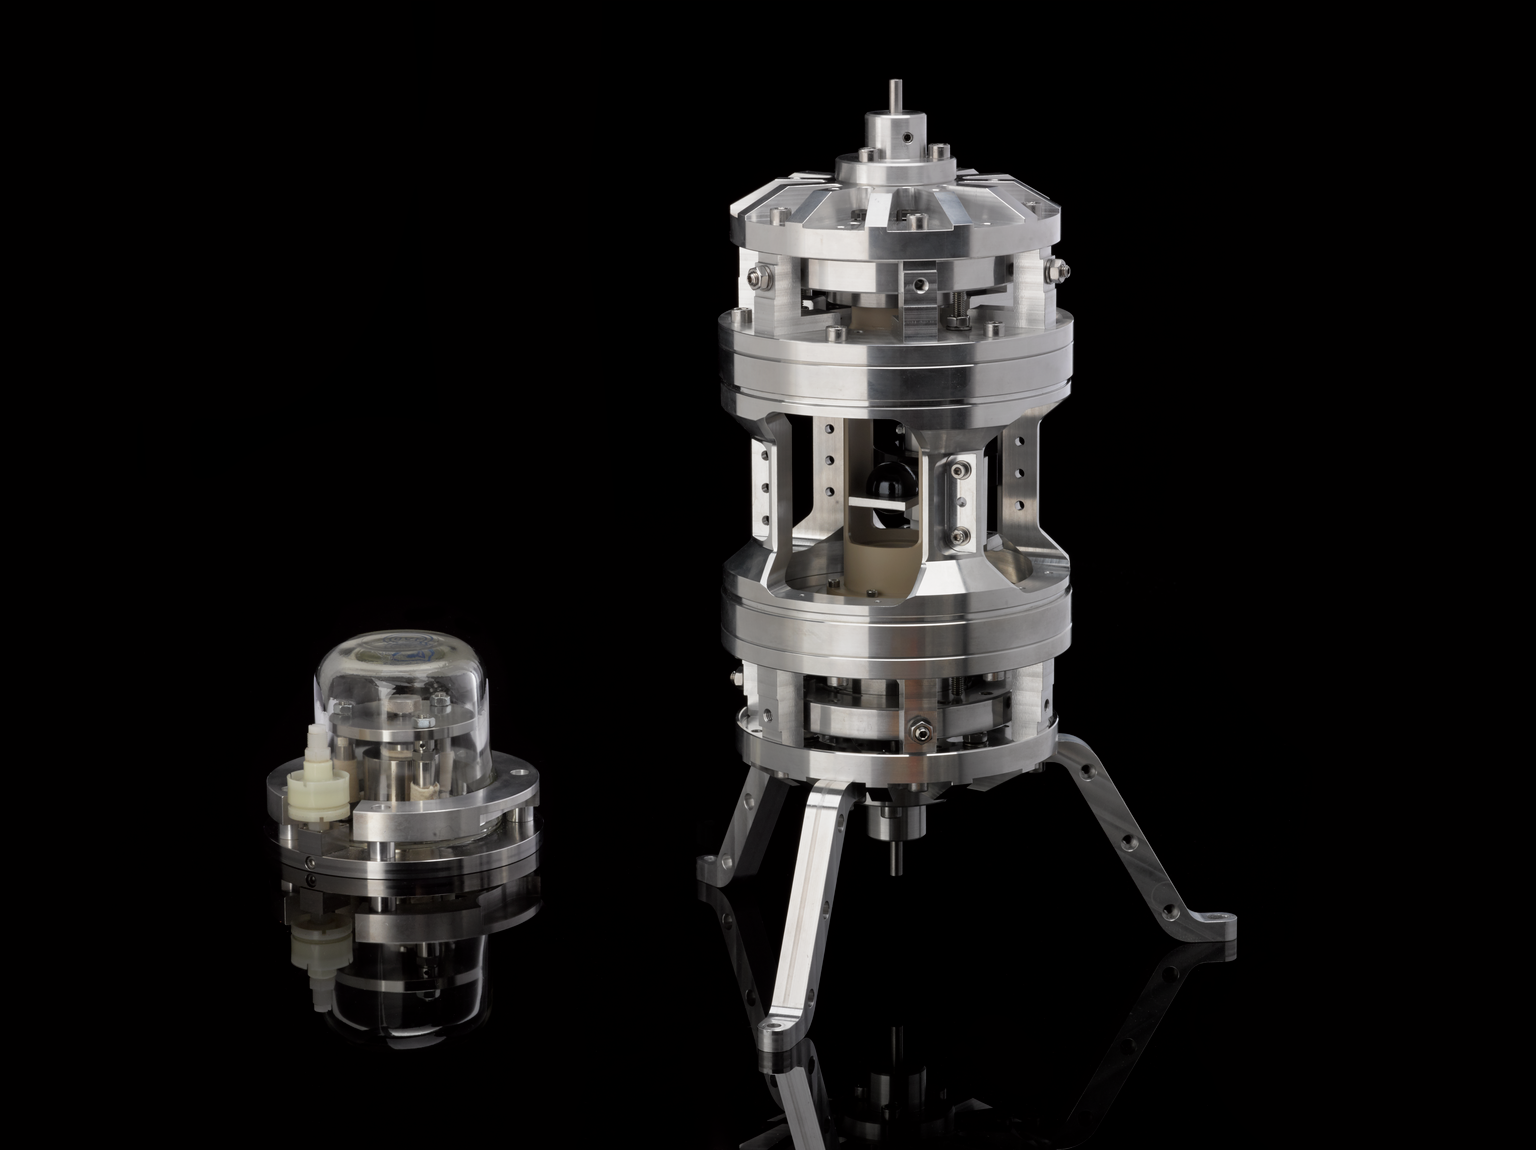 The UK Kilogram and a Kibble Balance now on display in How much does a kilogram weigh? in the Tomorrow's World gallery